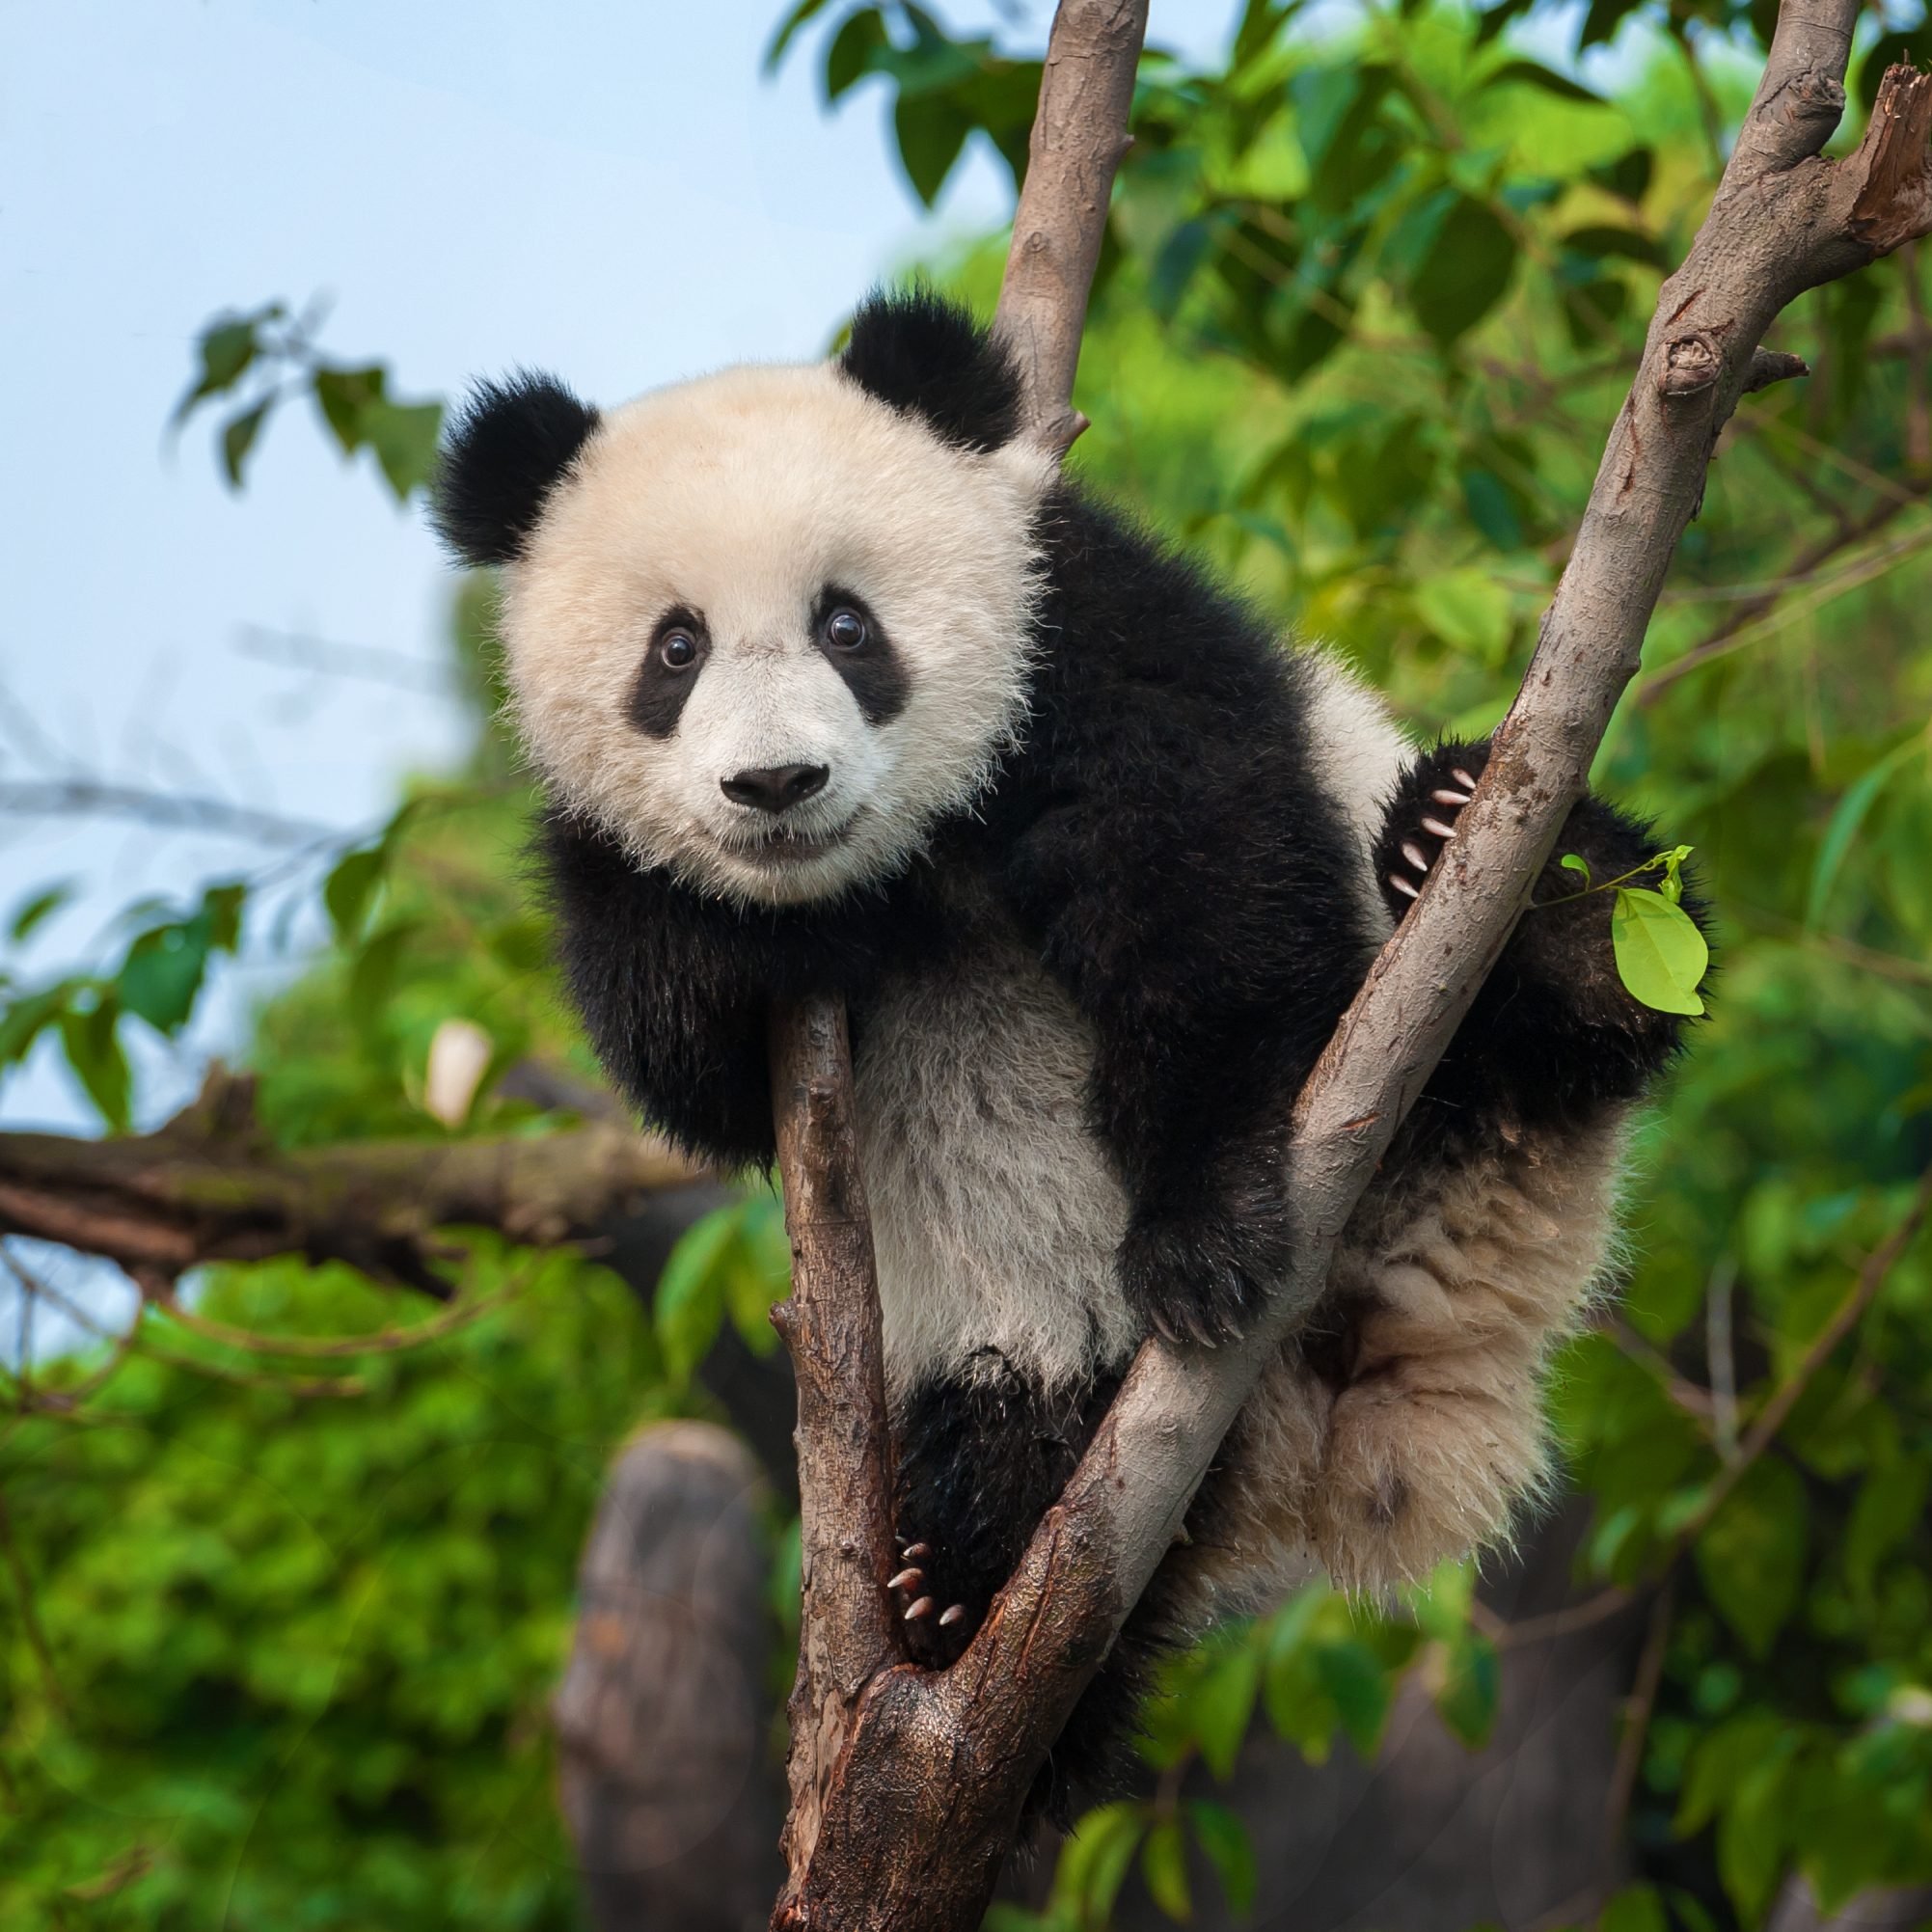 How many giant pandas are left in the world?